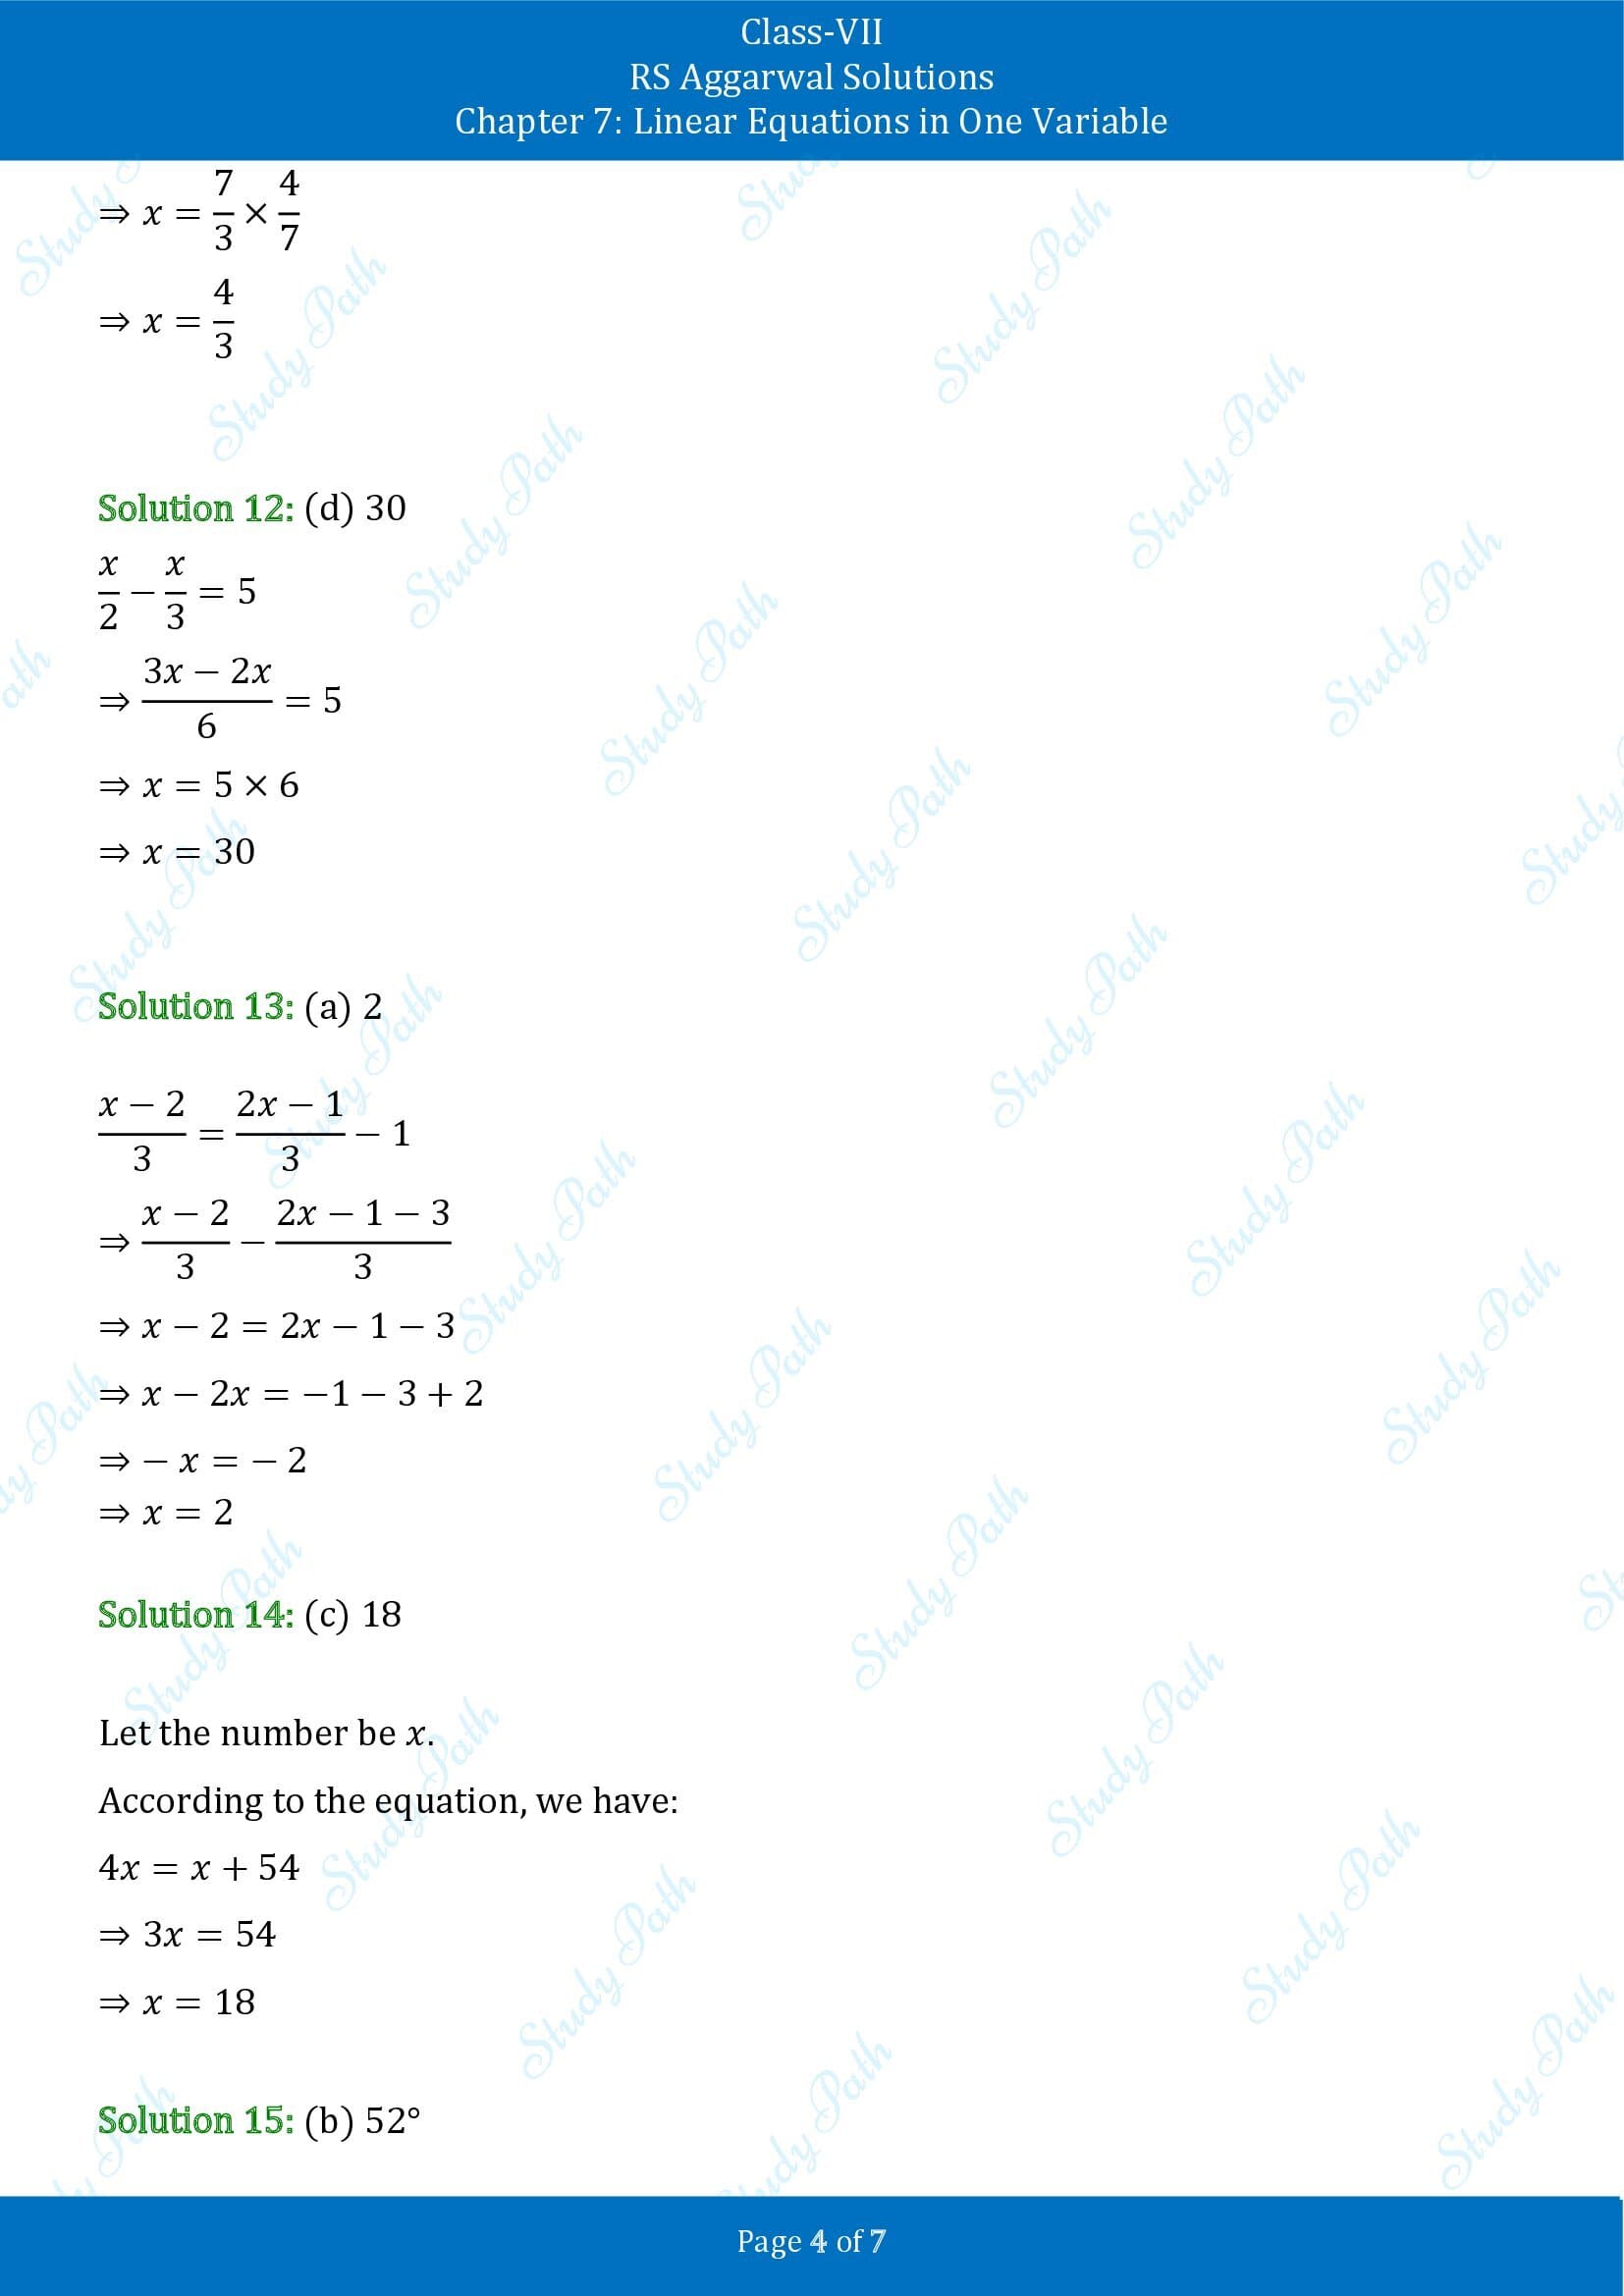 RS Aggarwal Solutions Class 7 Chapter 7 Linear Equations in One Variable Test Paper 00004